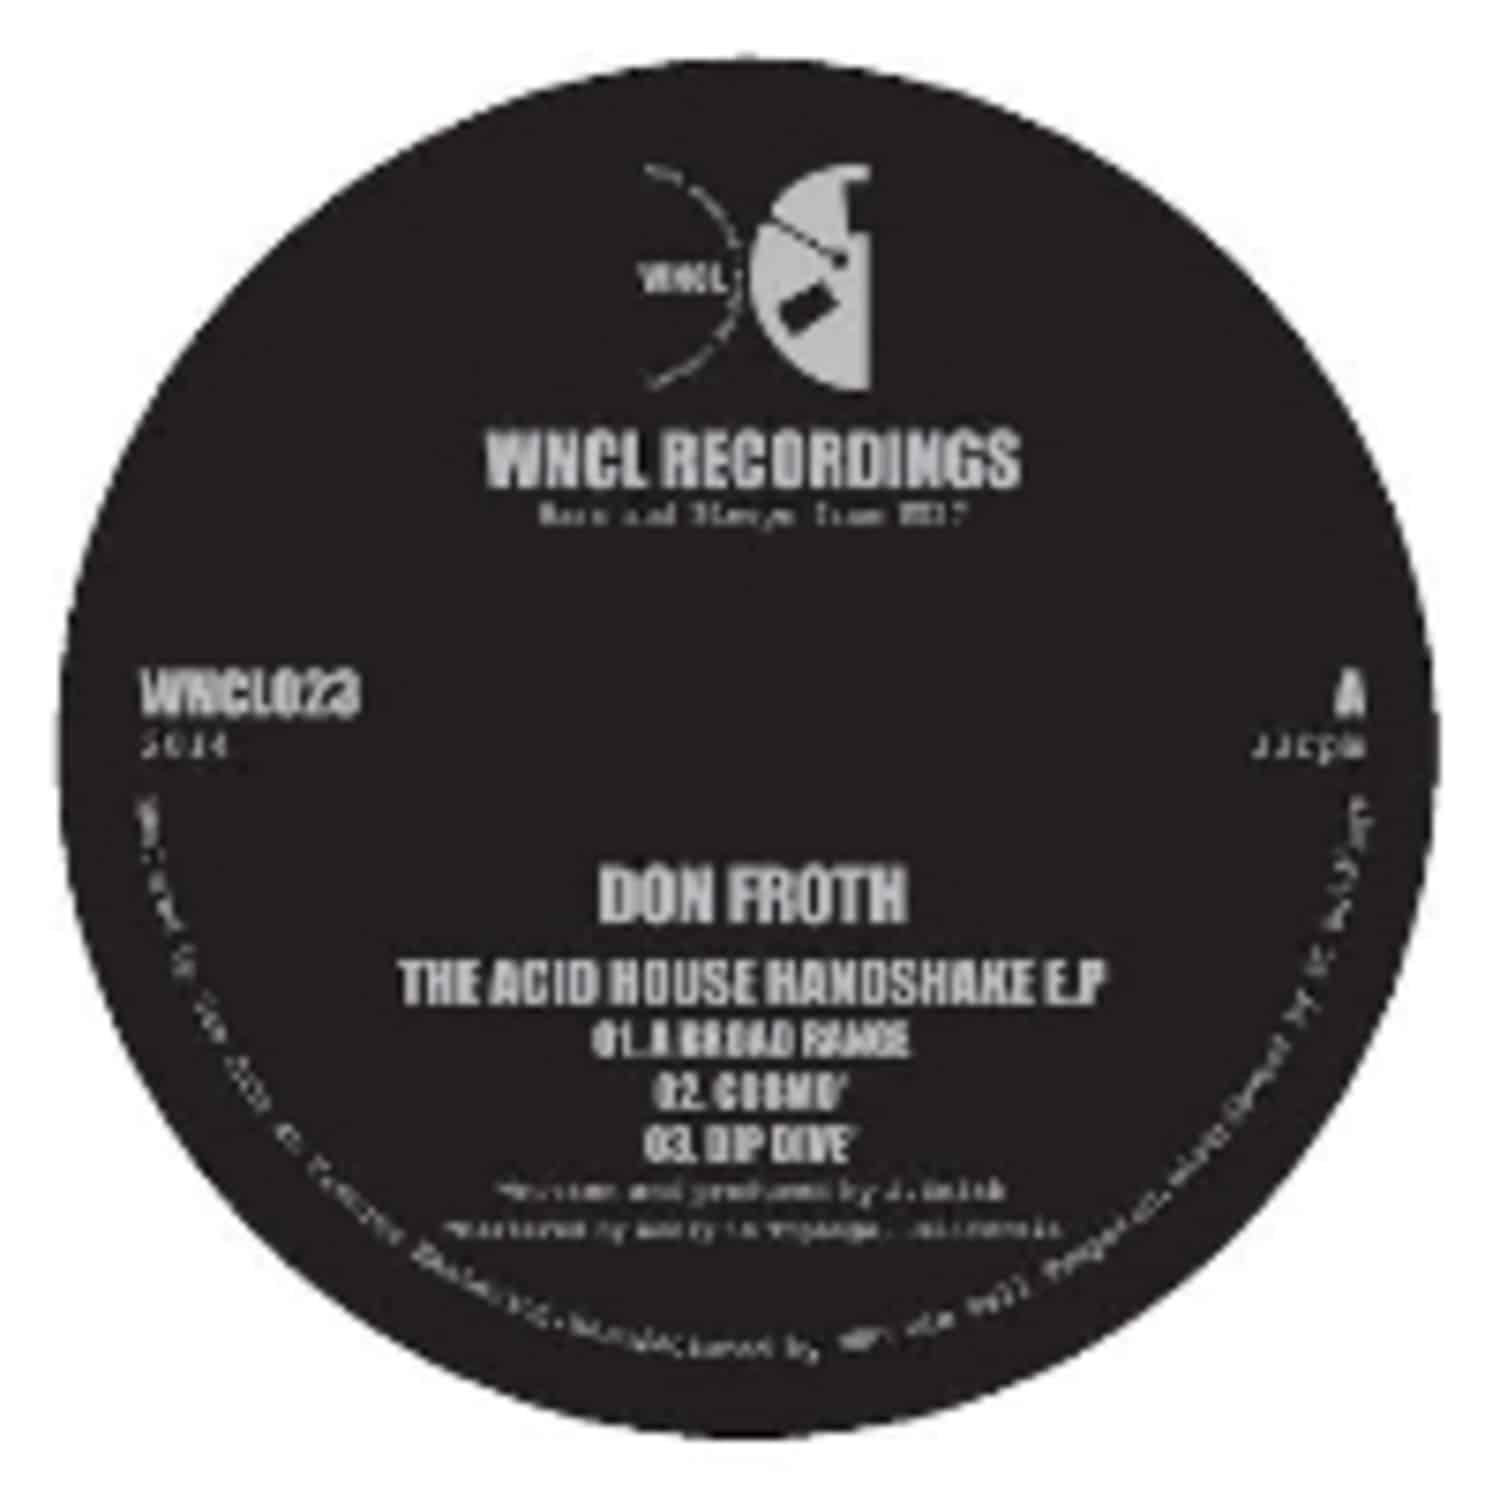 Don Froth - THE ACID HOUSE HANDSHAKE EP